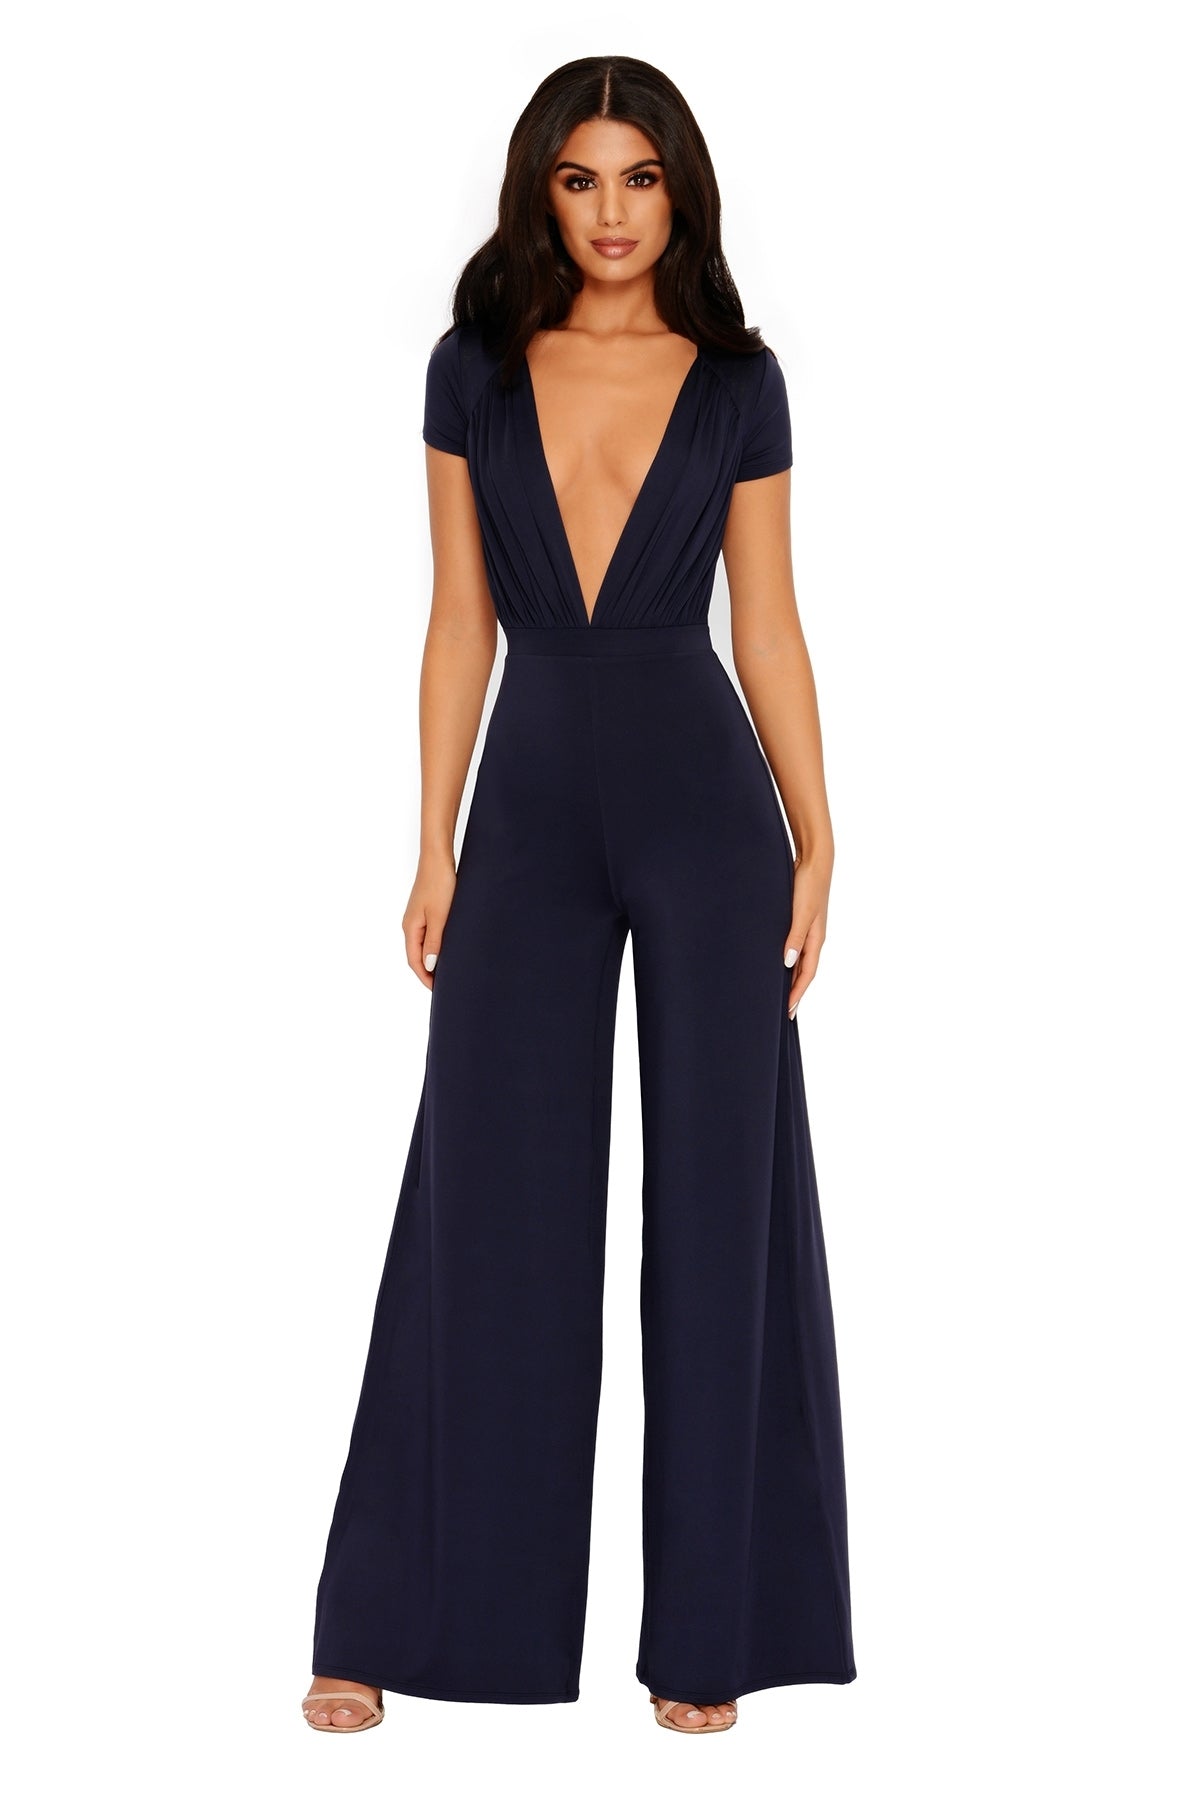 PETITE Sleeve It To Me Extreme Plunge Wide Leg Jumpsuit in Navy